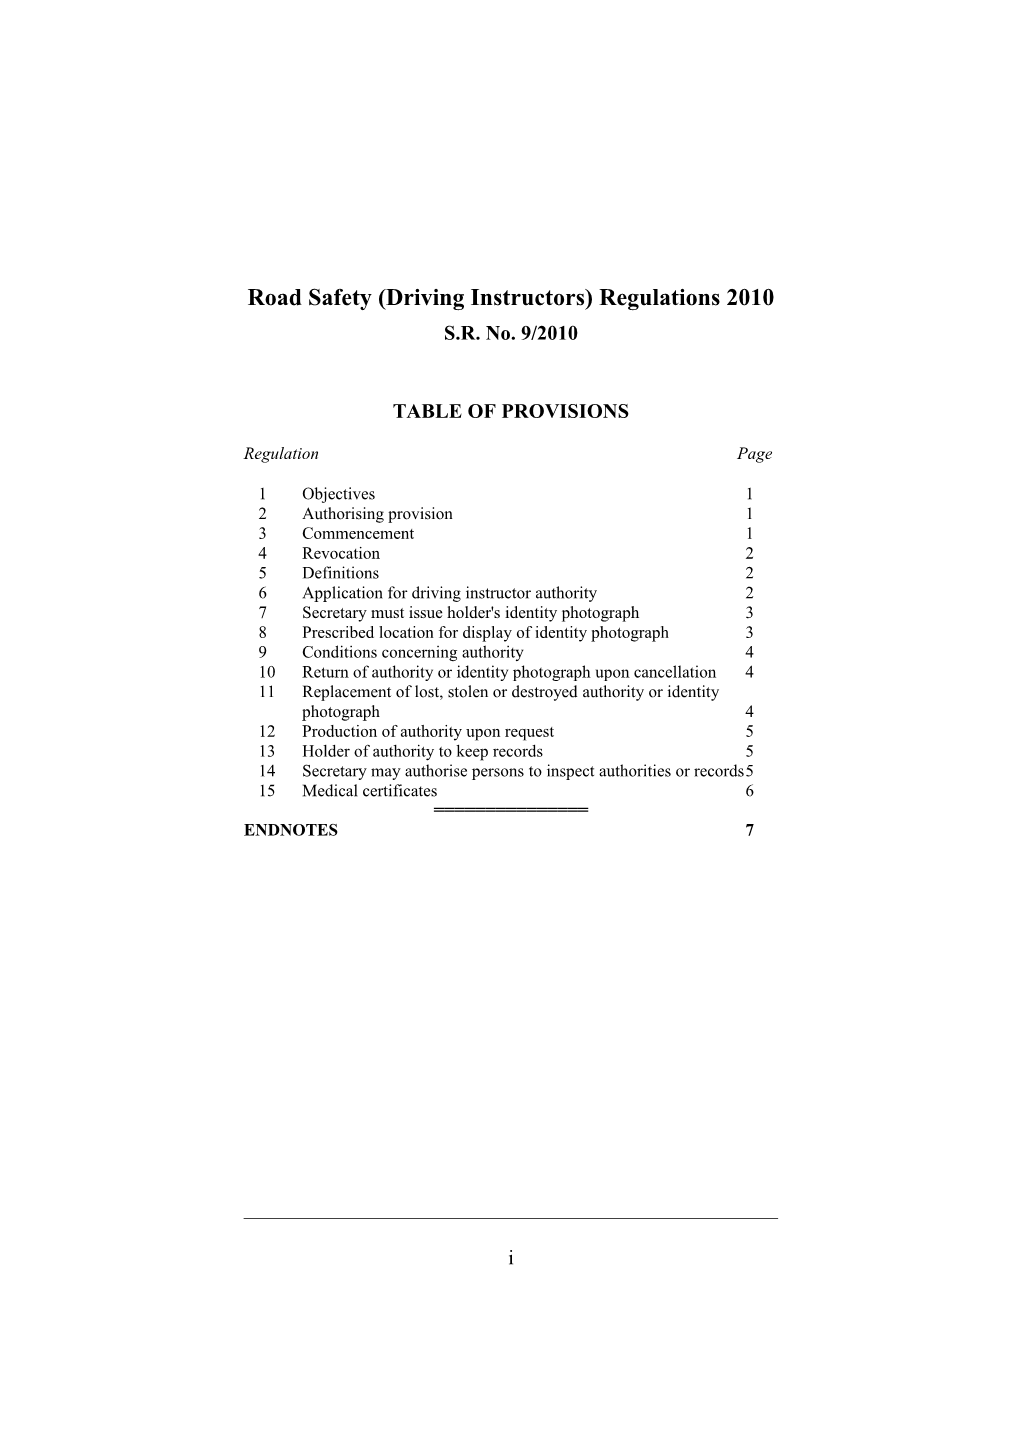 Road Safety (Driving Instructors) Regulations 2010